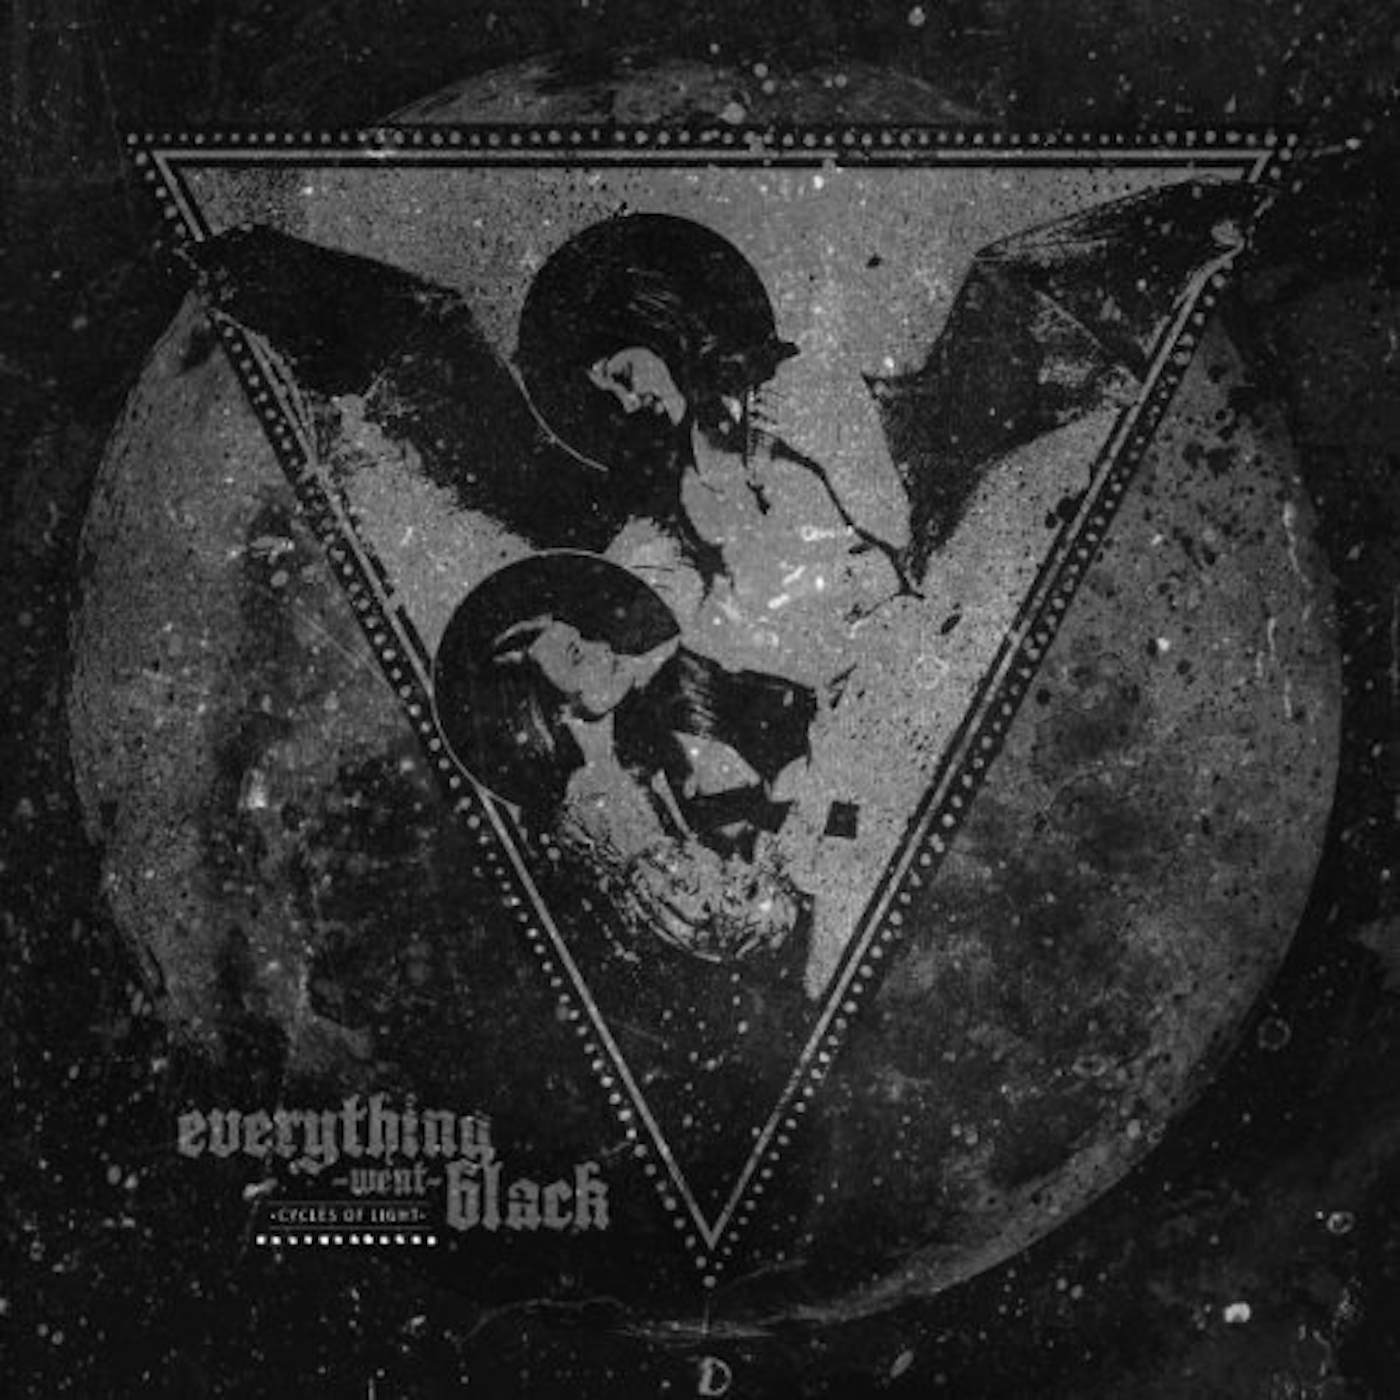 Everything Went Black Cycles of Light Vinyl Record